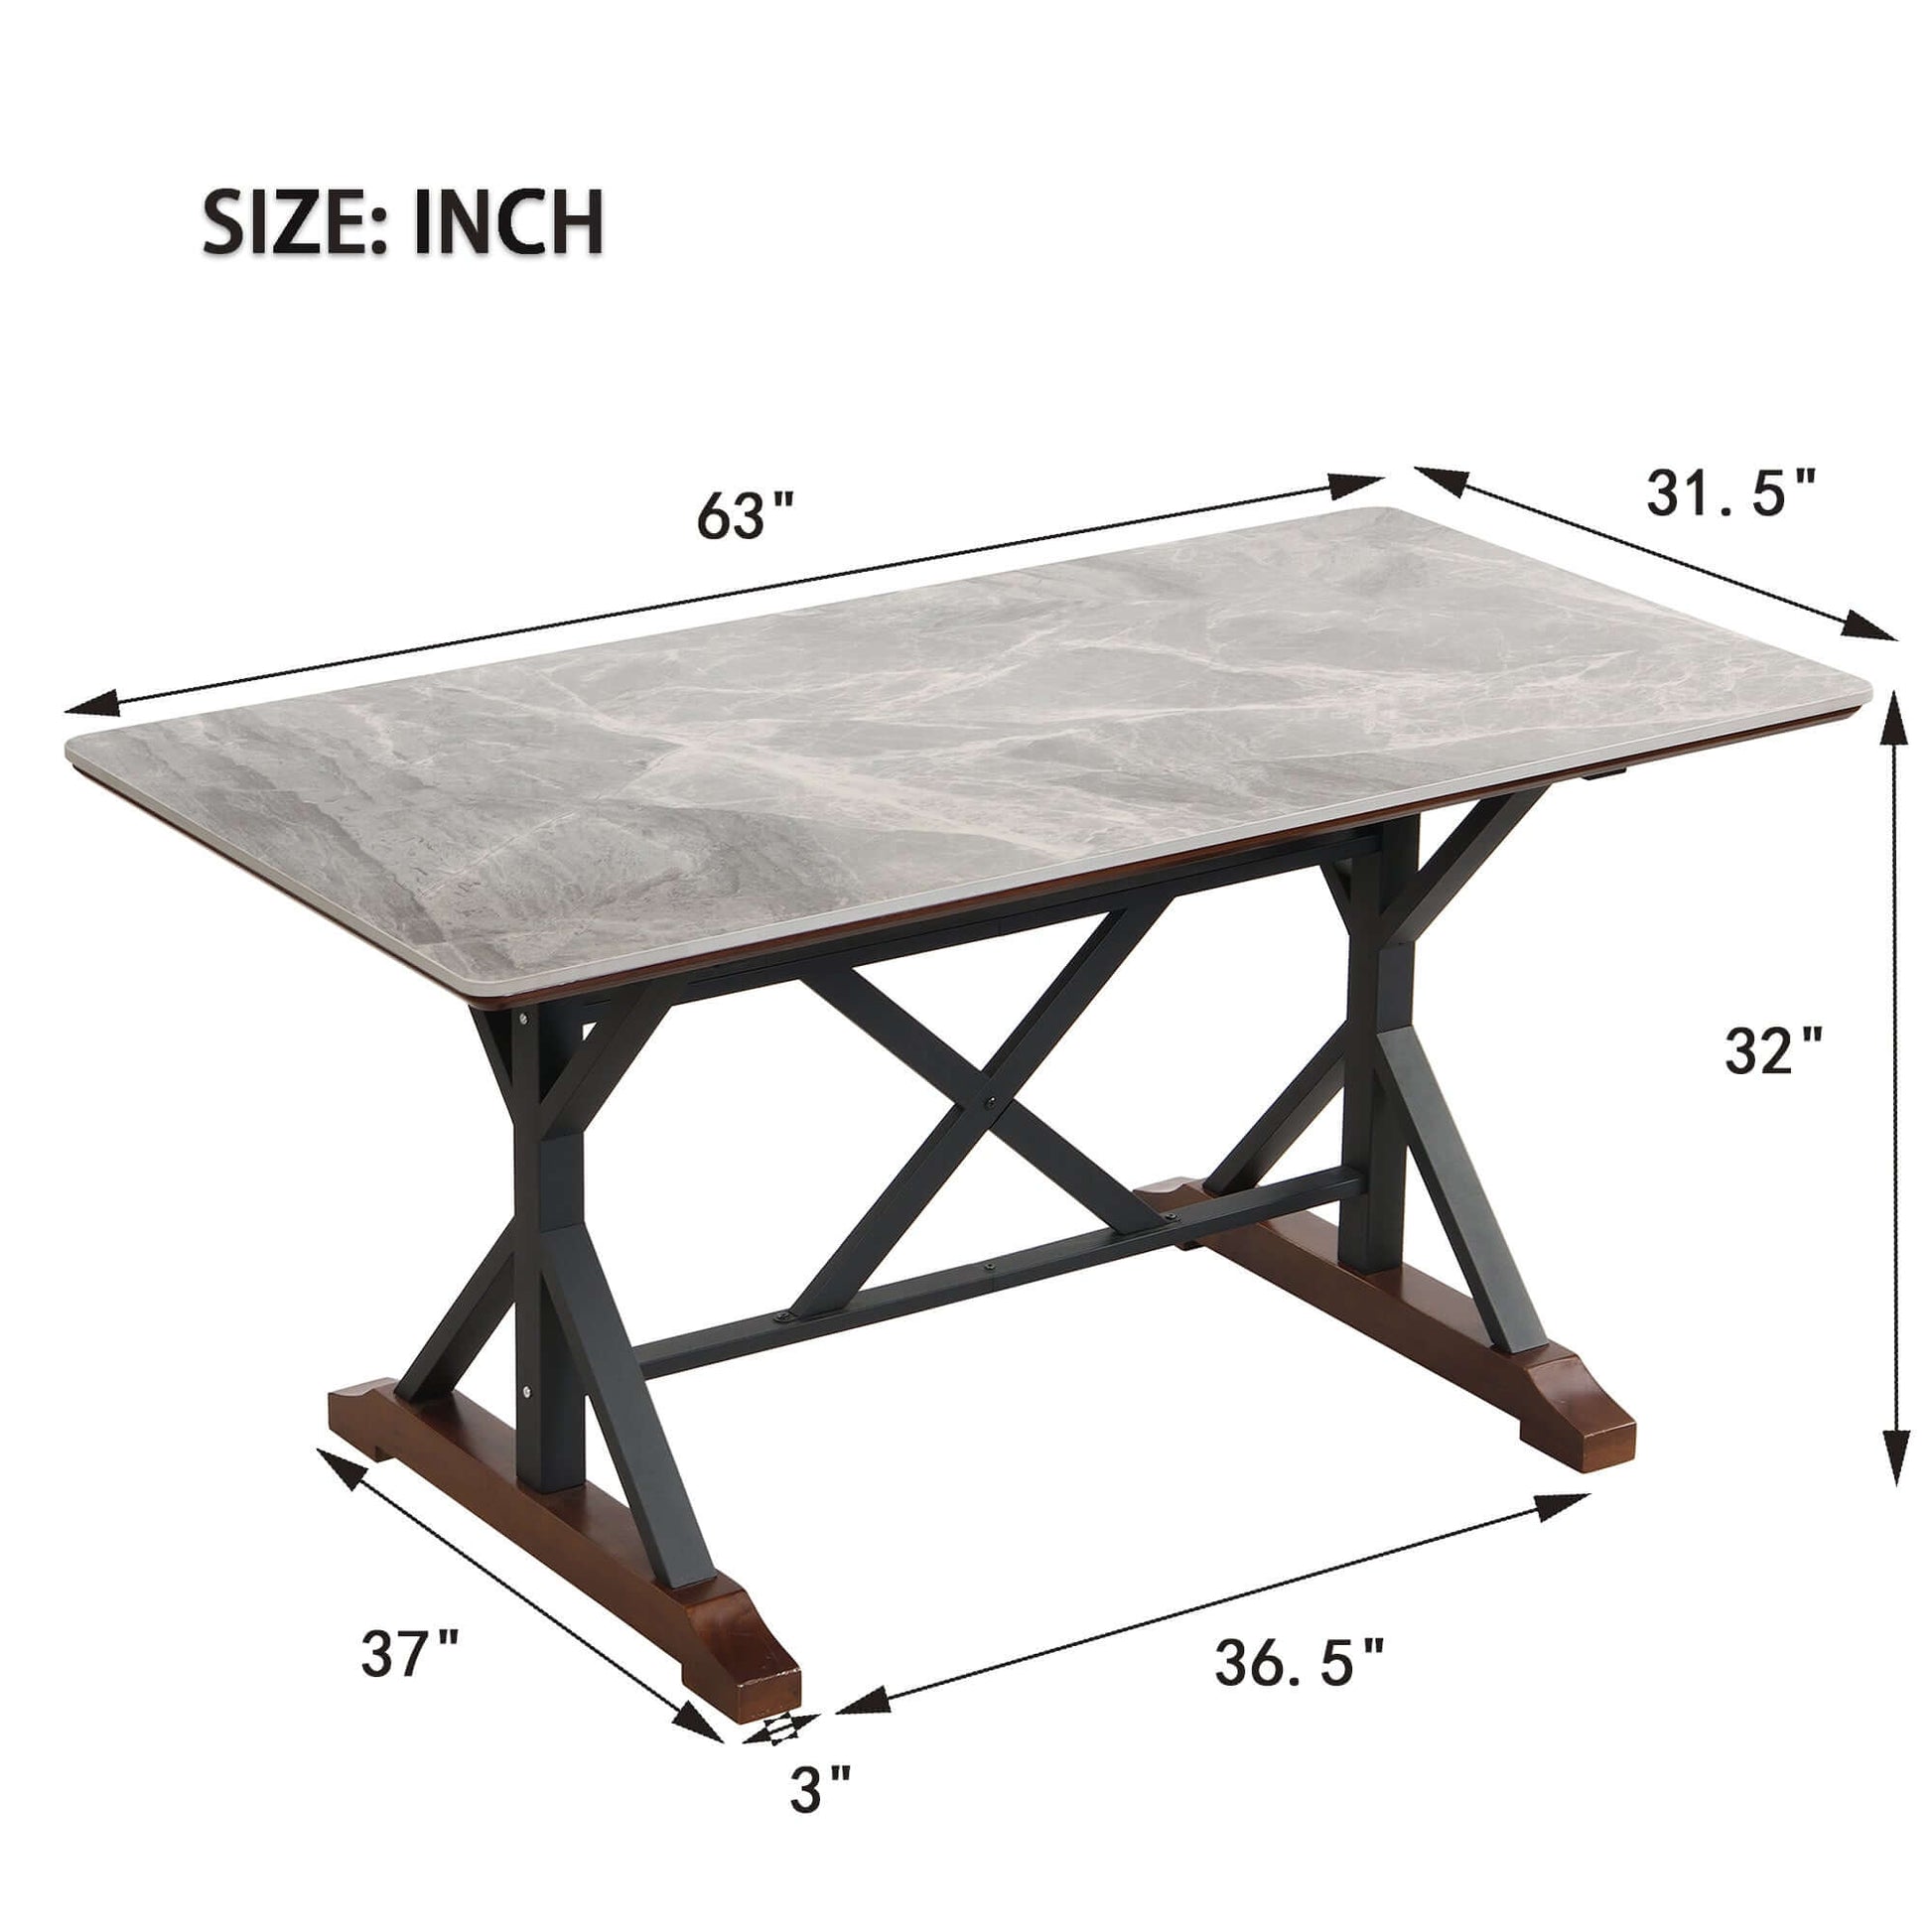 63-inch rectangle gray sintered stone dining table dimensions chart for dining room set.